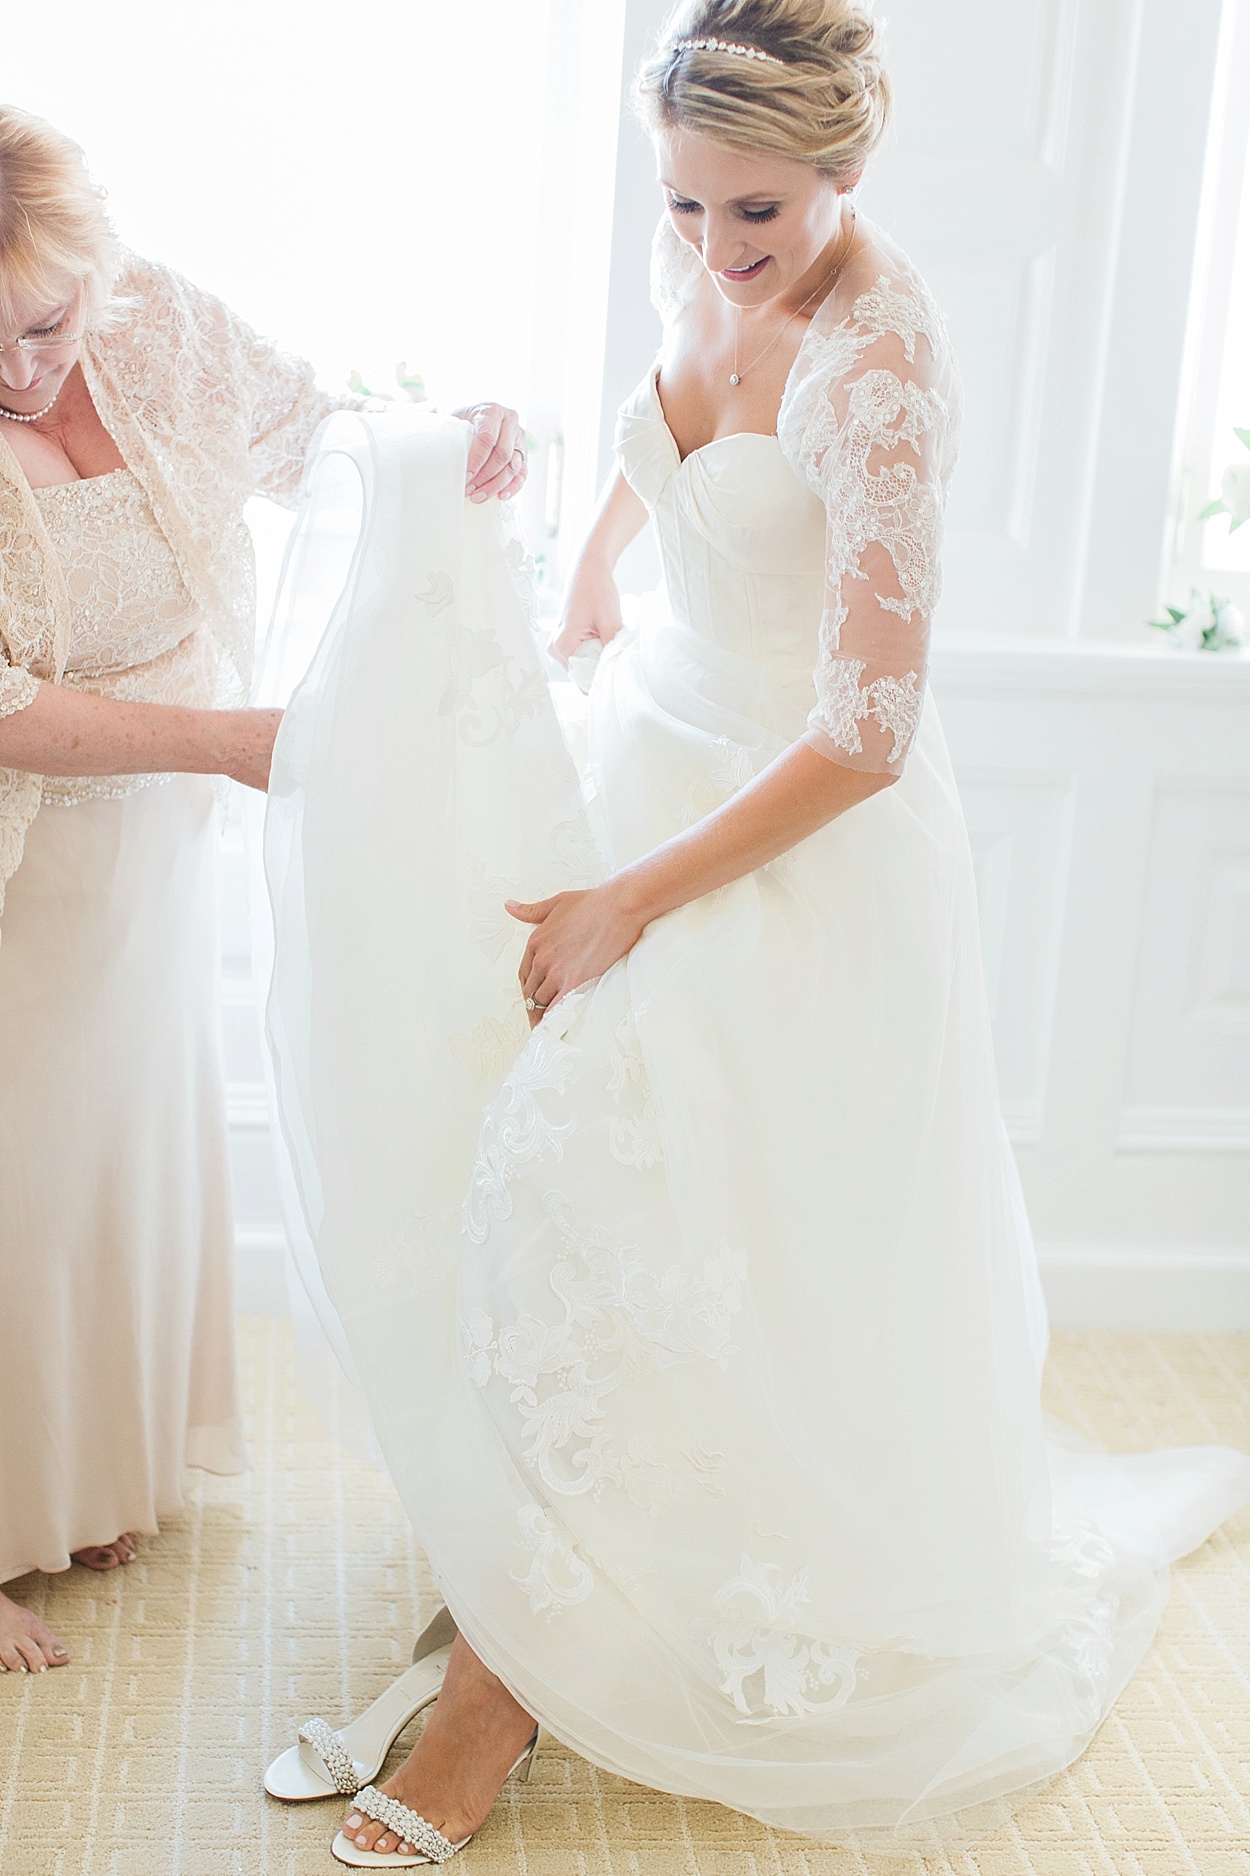 Trump Hotel DC wedding at the Old Post Office | Abby Grace Photography